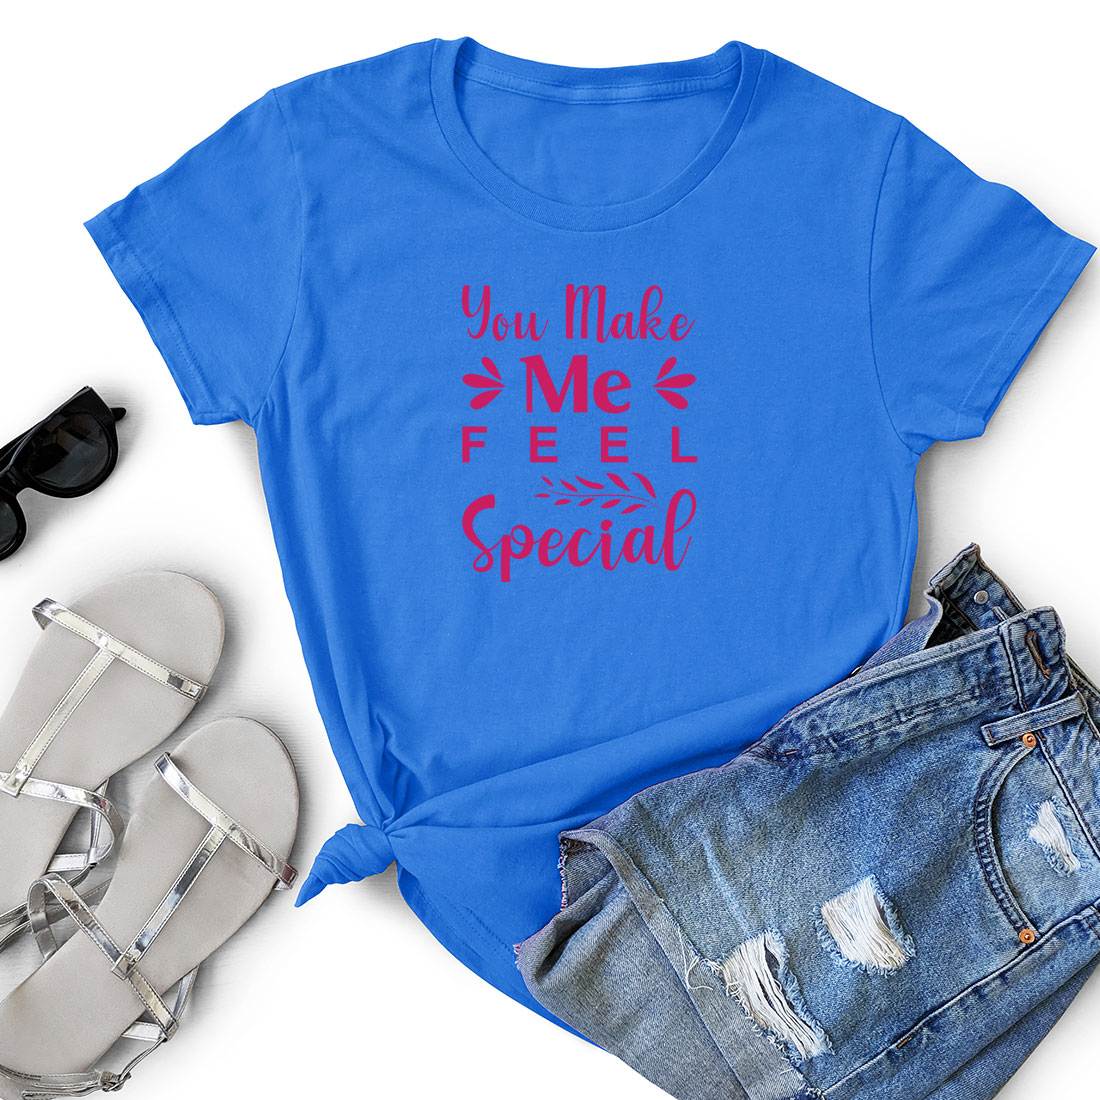 T - shirt that says you make me feel special.